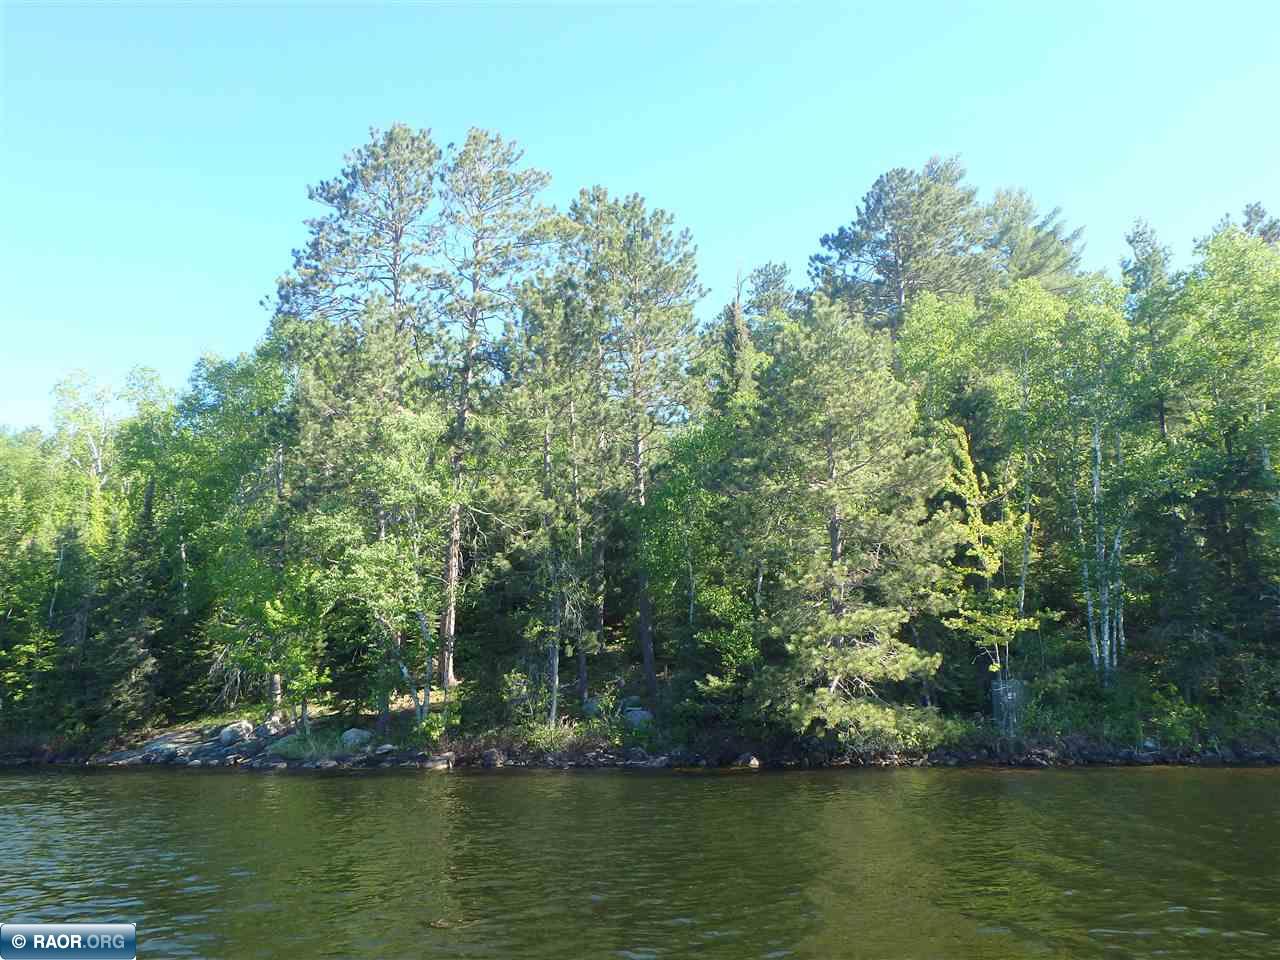 TBD Hinsdale Island, Cook, MN 55723